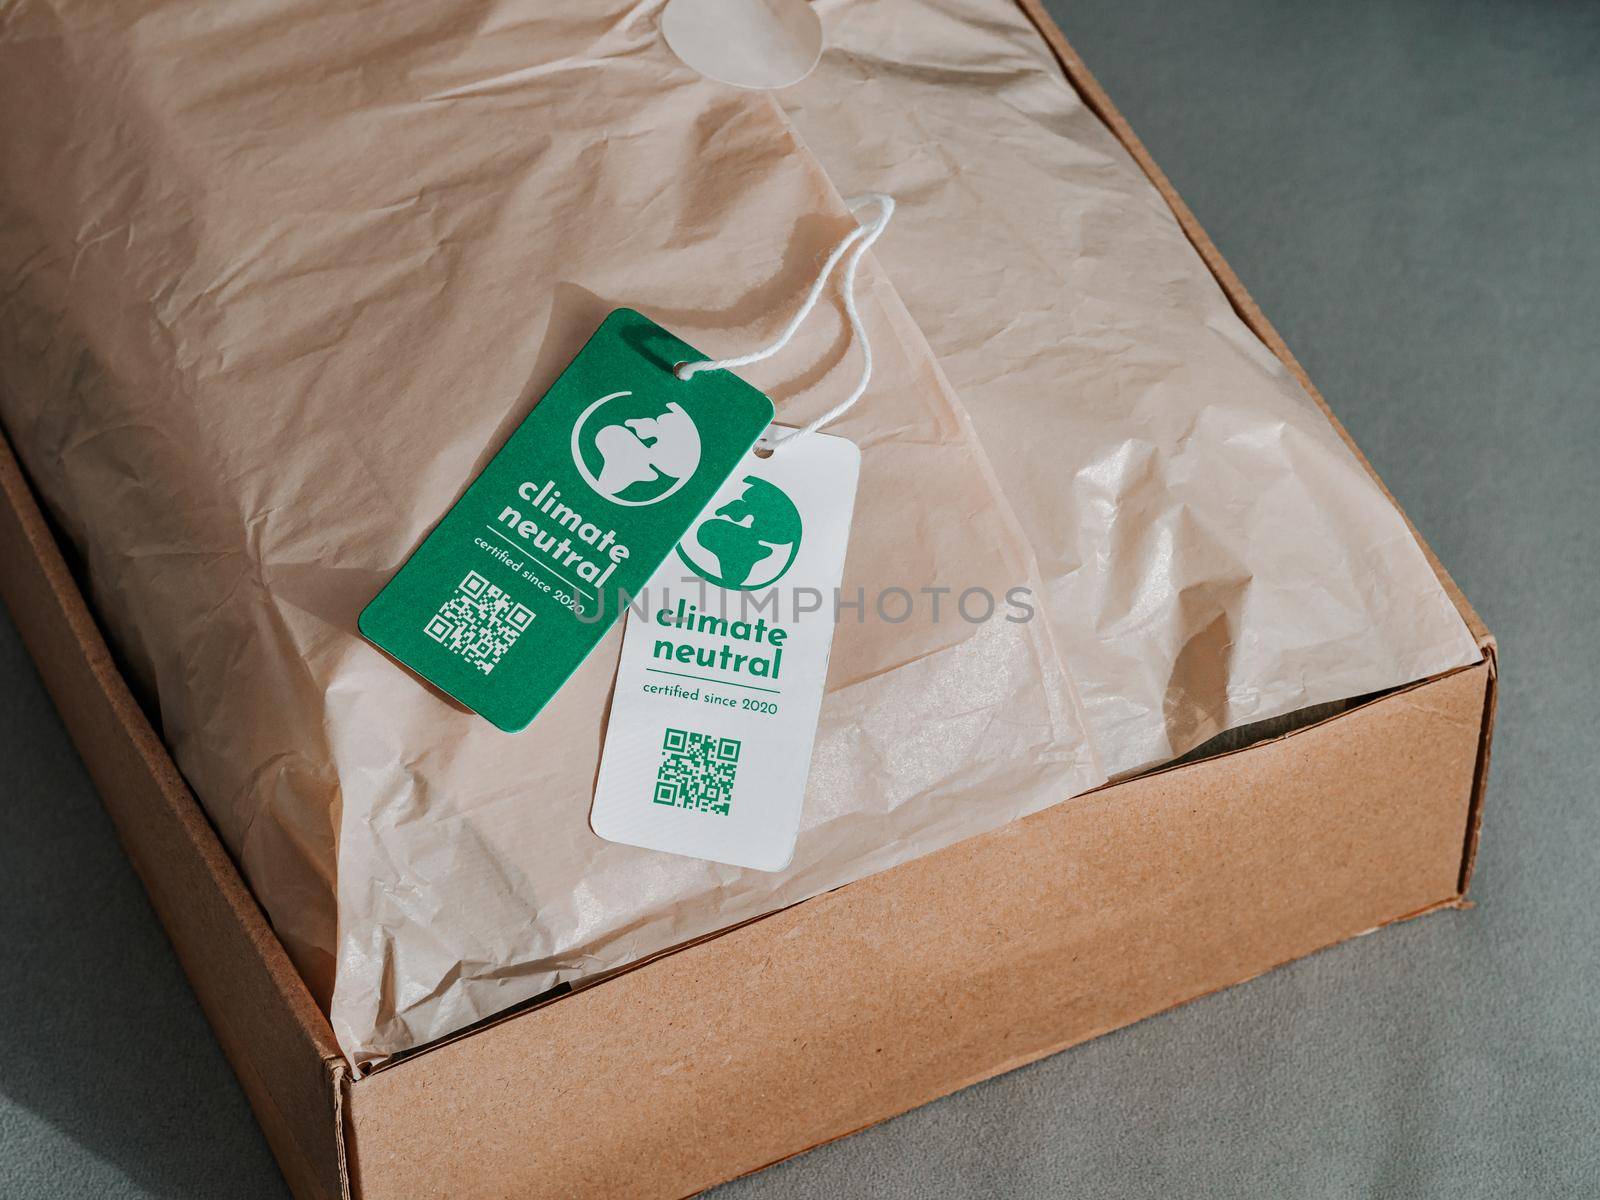 Carbon neutral product in craft corrugated box with label Climate neutral. Carbon neutral label concept in apparel, fashion, logistics indusrty and ethical consumption. Increasing awareness for customers about carbon footpint